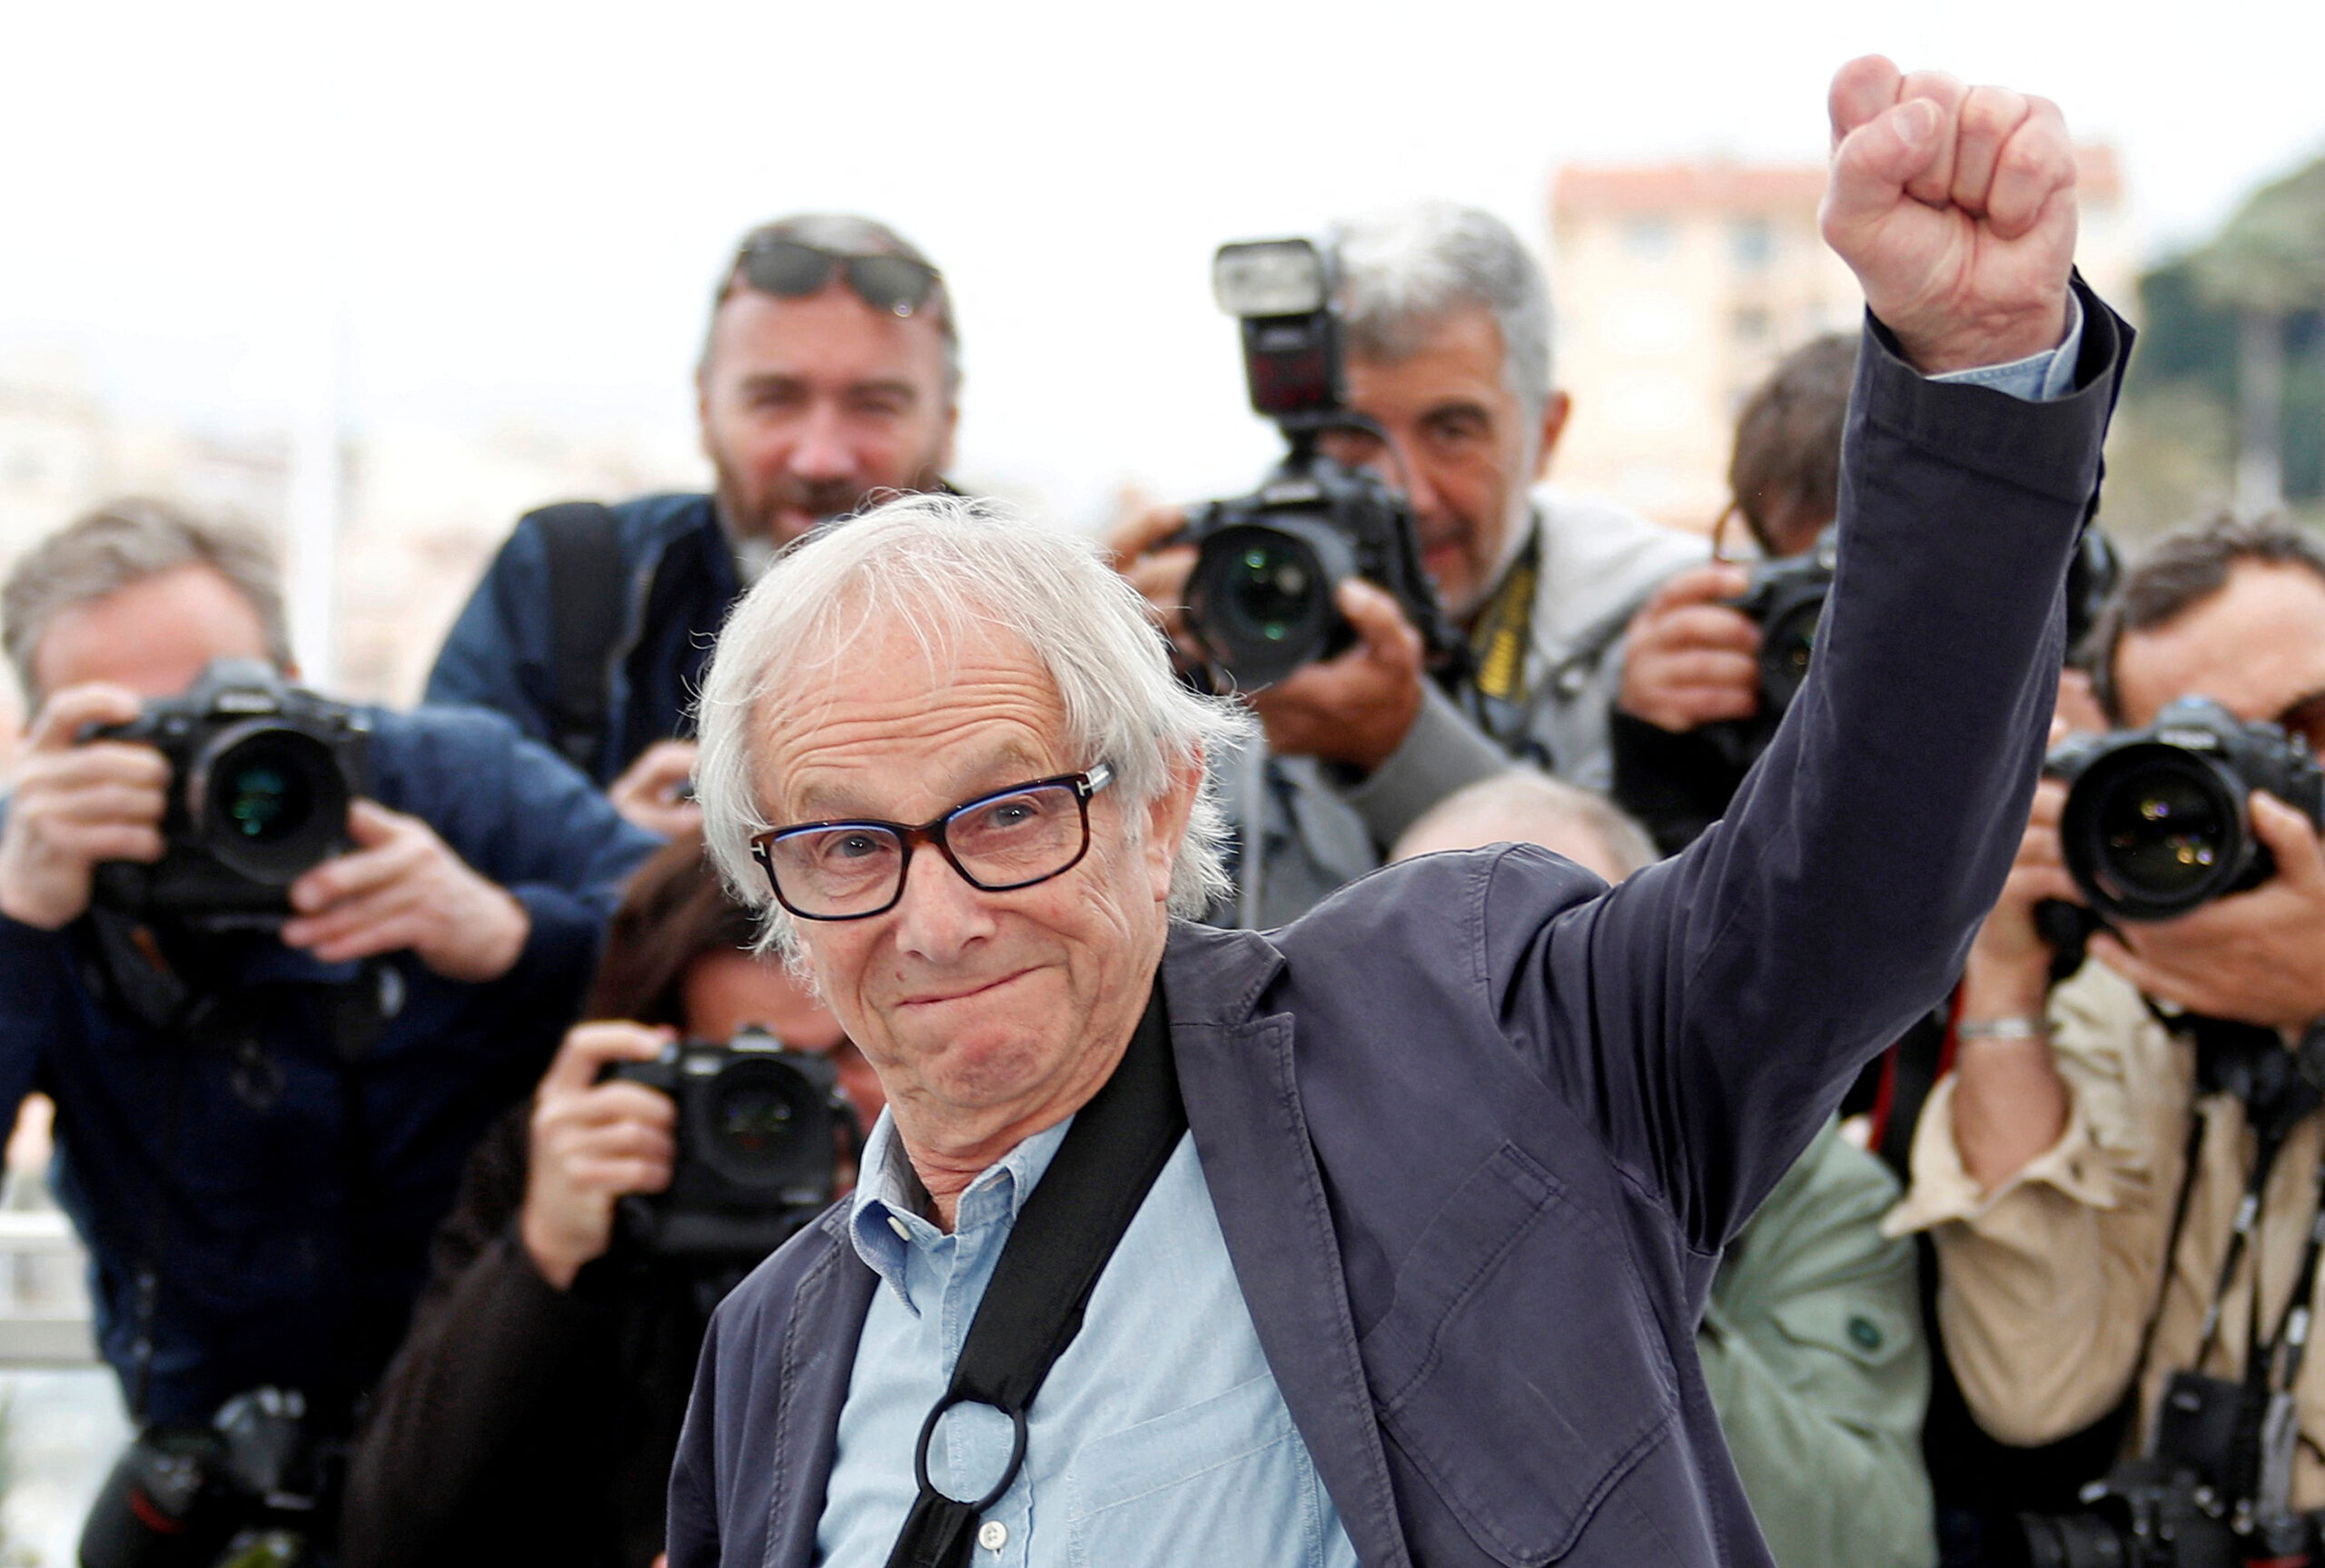  72nd Cannes Film Festival - Photocall for the film "Sorry We Missed You" in competition - Cannes, France, May 17, 2019. Director Ken Loach gestures. REUTERS/Eric Gaillard/File Photo